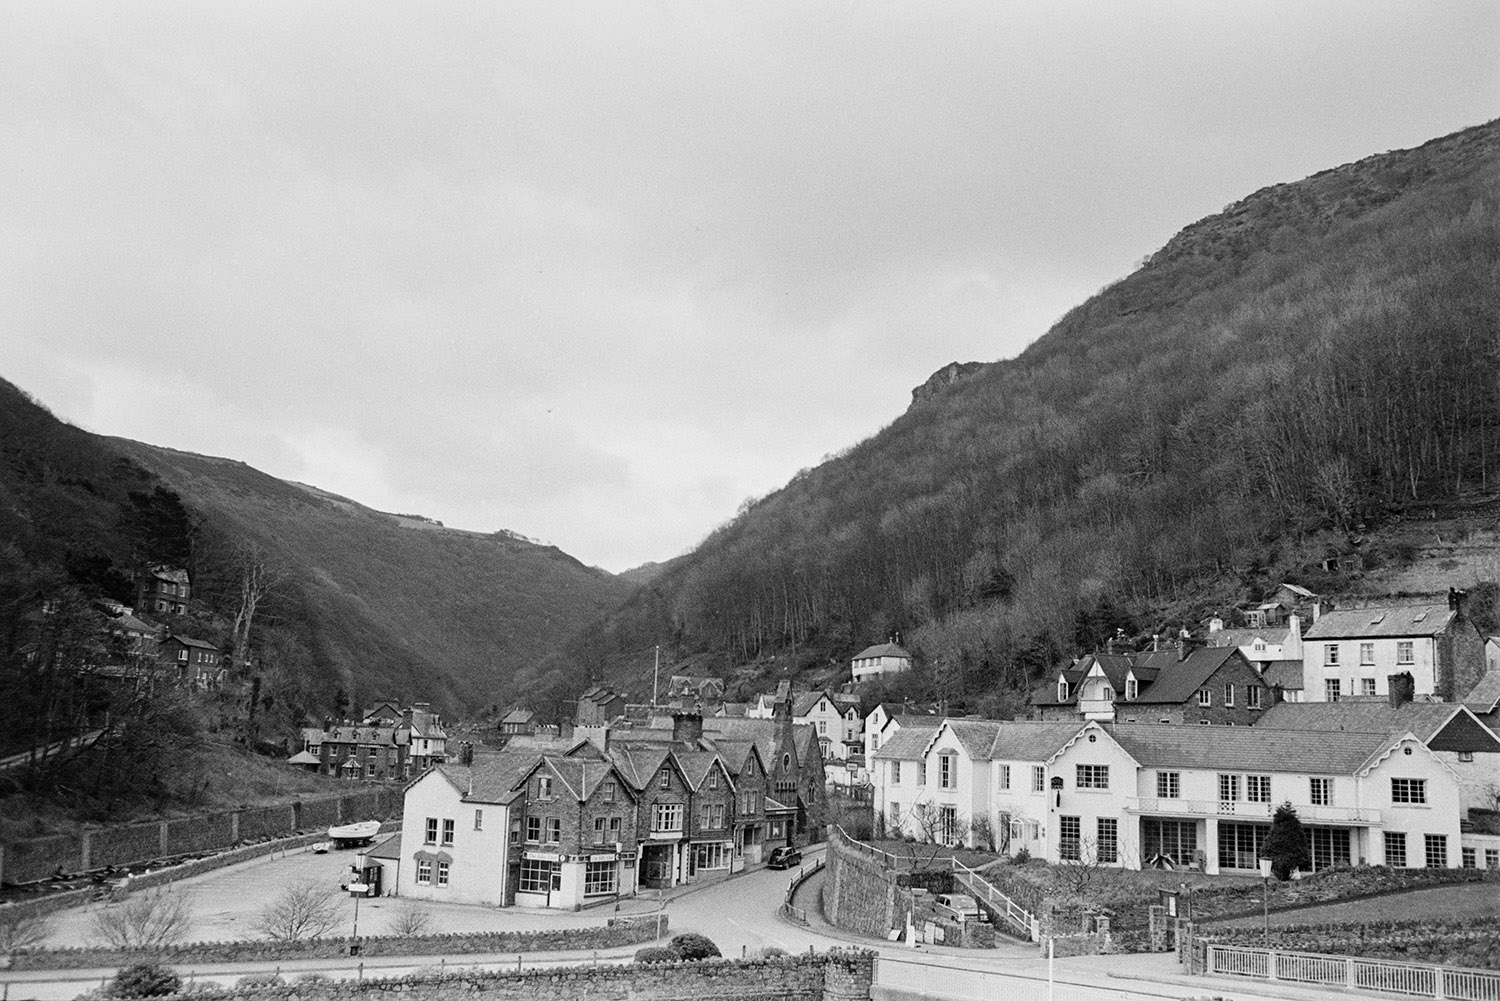 A view of the town of Lynmouth and the wooded valley behind.